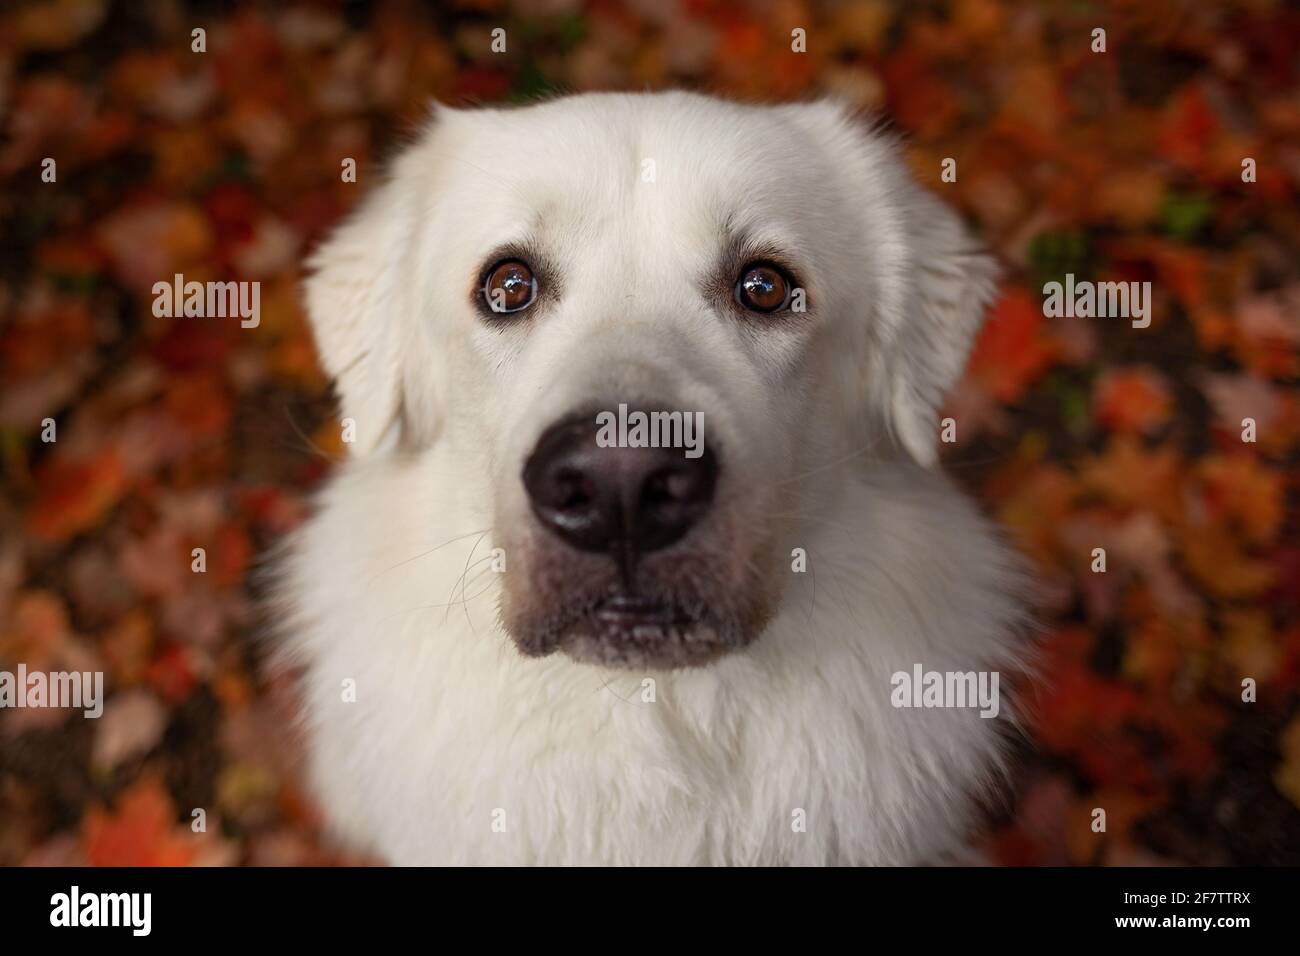 White dog looking into camera lens. Red leaves in the background. Stock Photo